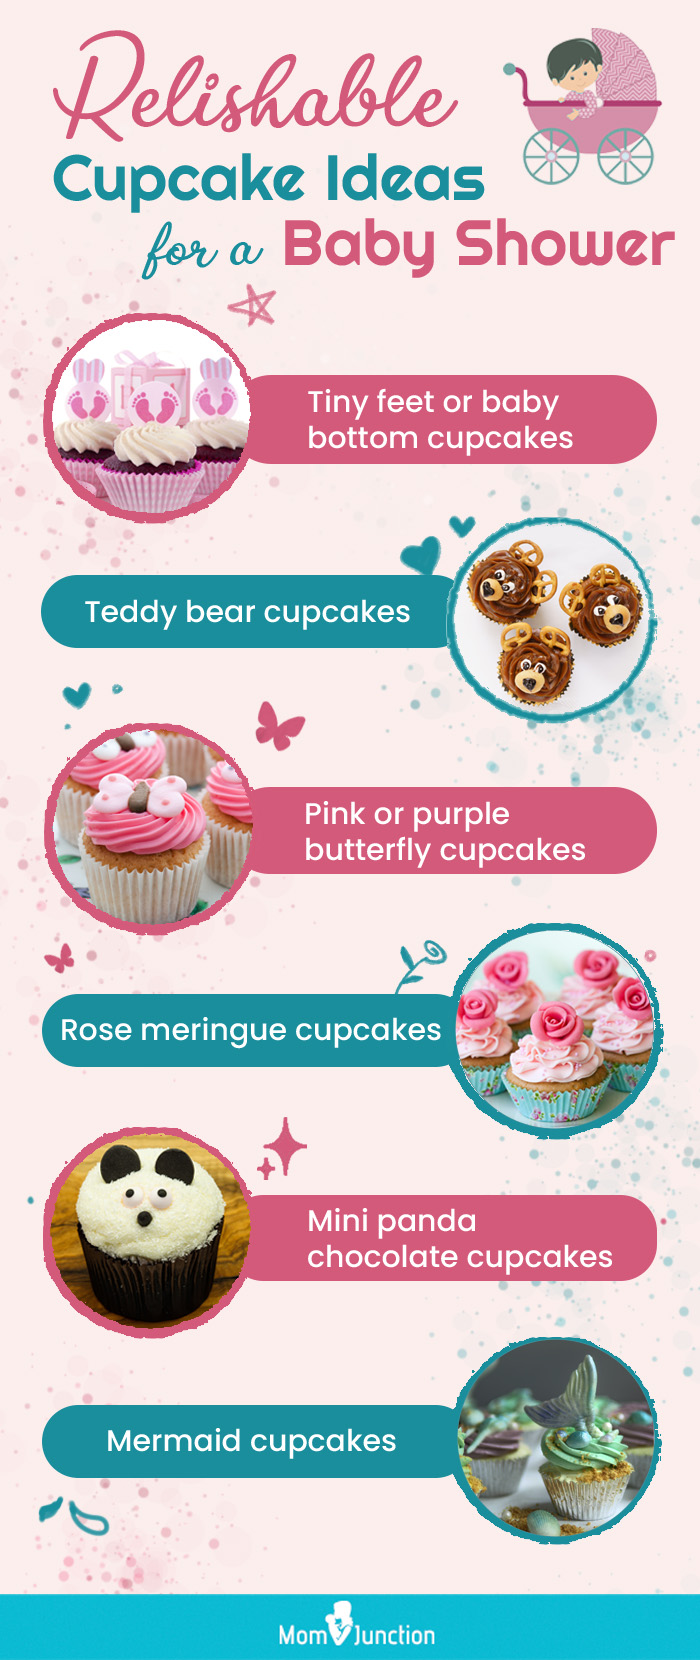 relishable cupcake ideas for a baby shower (infographic)